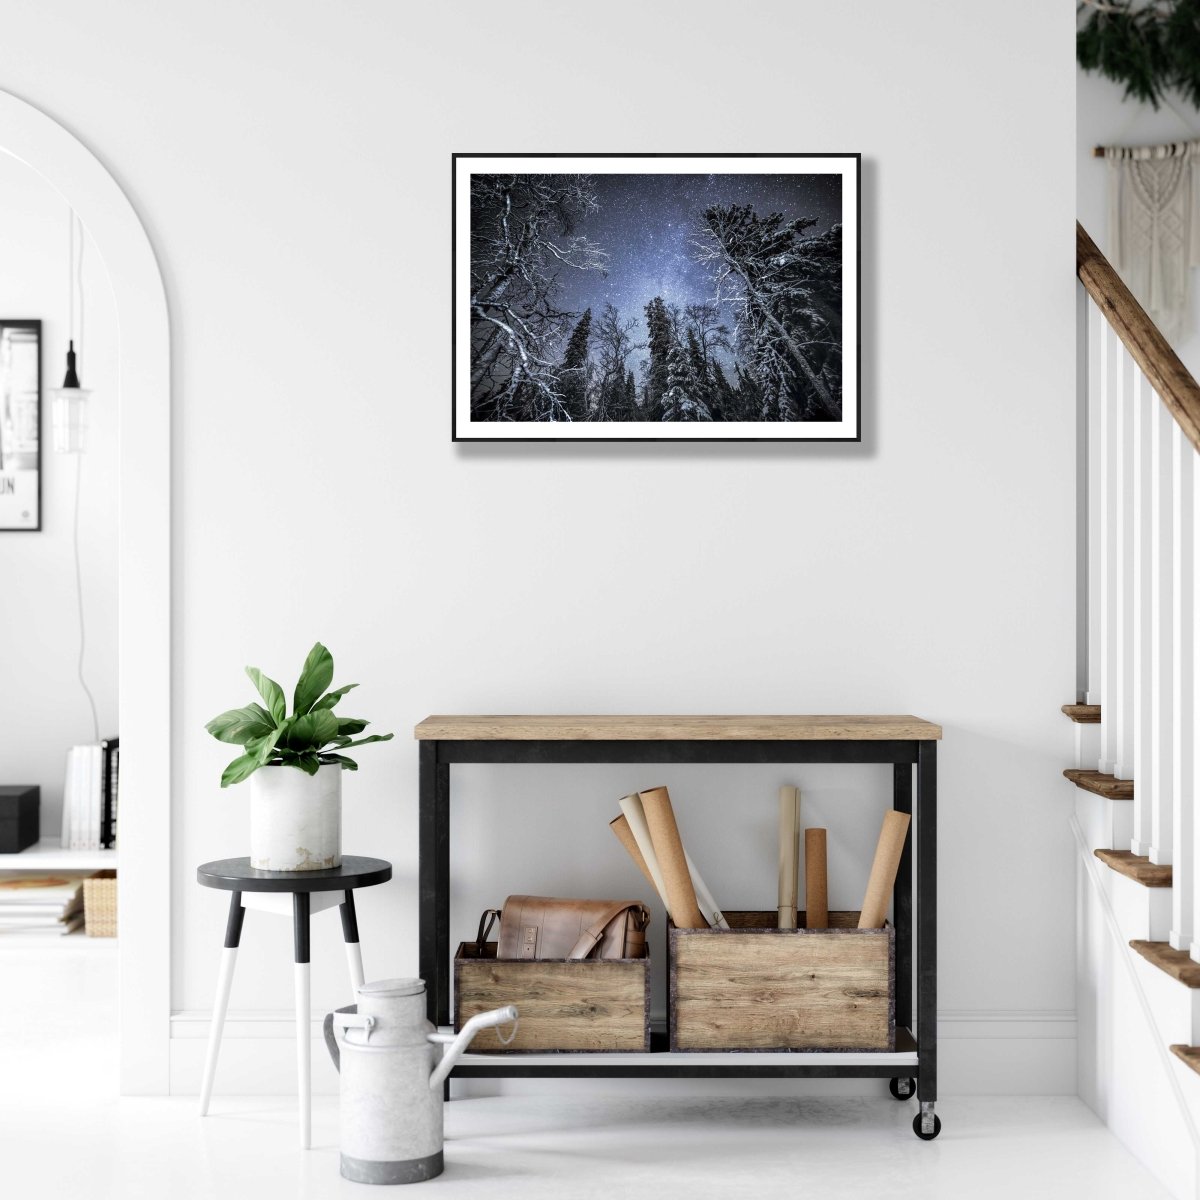 Framed illuminated trees in winter forest under starry sky, hung on white wall above desk.